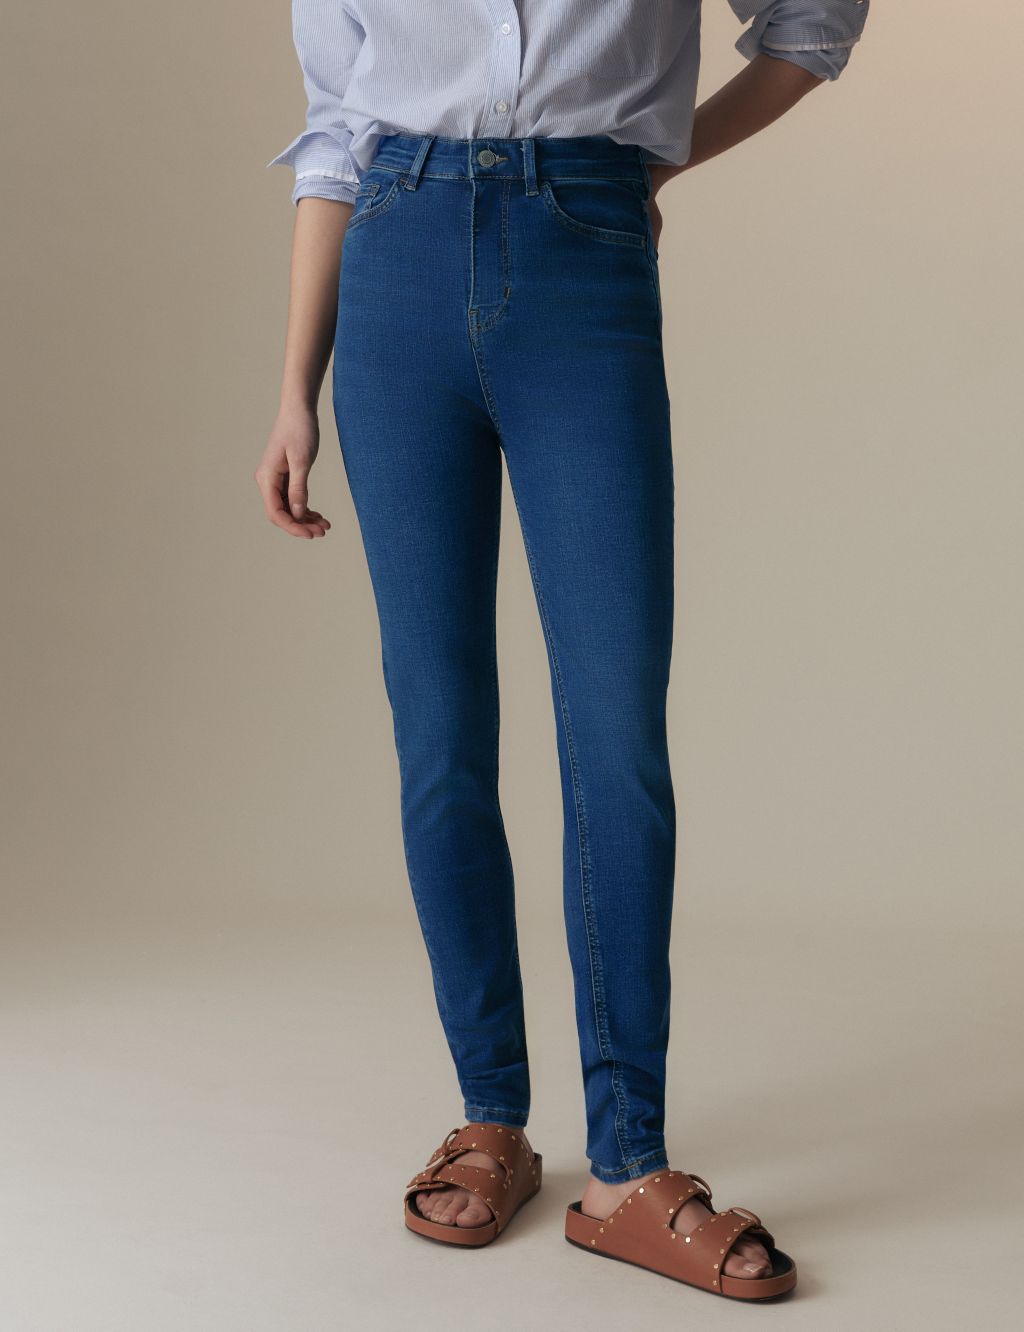 Lyocell Rich High Waisted Skinny Jeans image 4